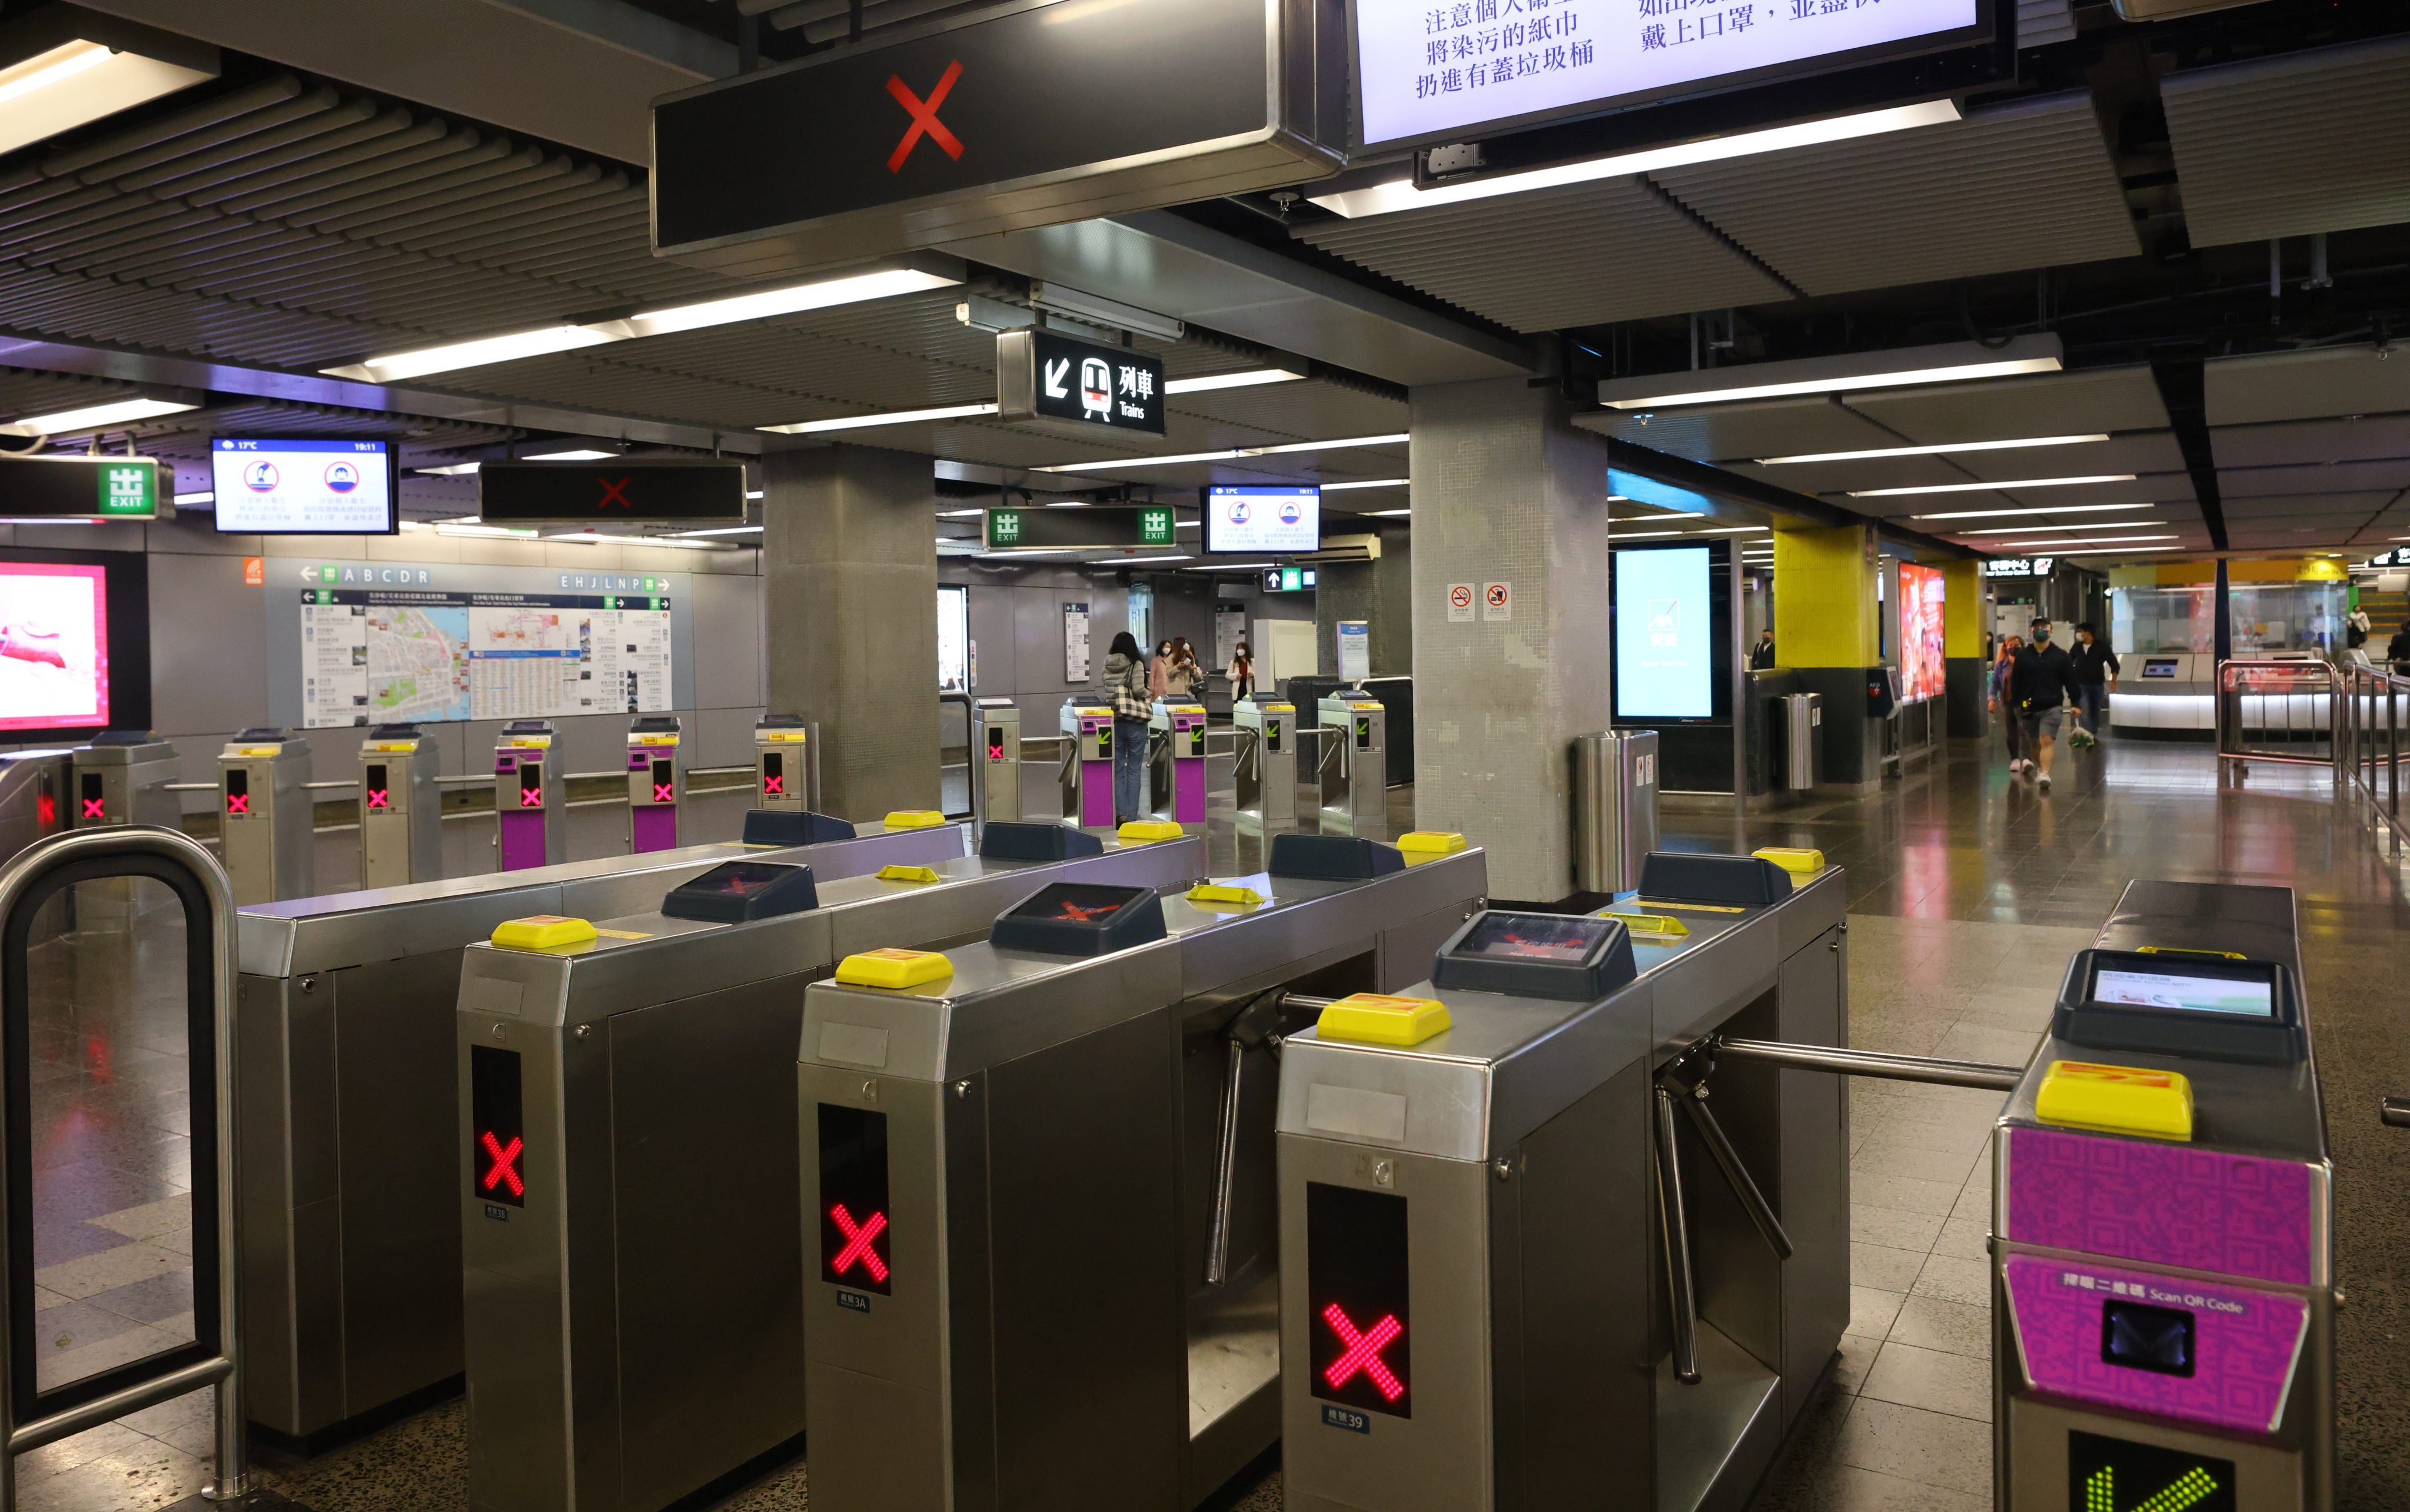 Idle turnstiles in a deserted station on a Sunday in Tsim Sha Tsui, in what used to be one of Hong Kong’s busiest transport terminals, on 13 February 2022. Photo: Dickson Lee